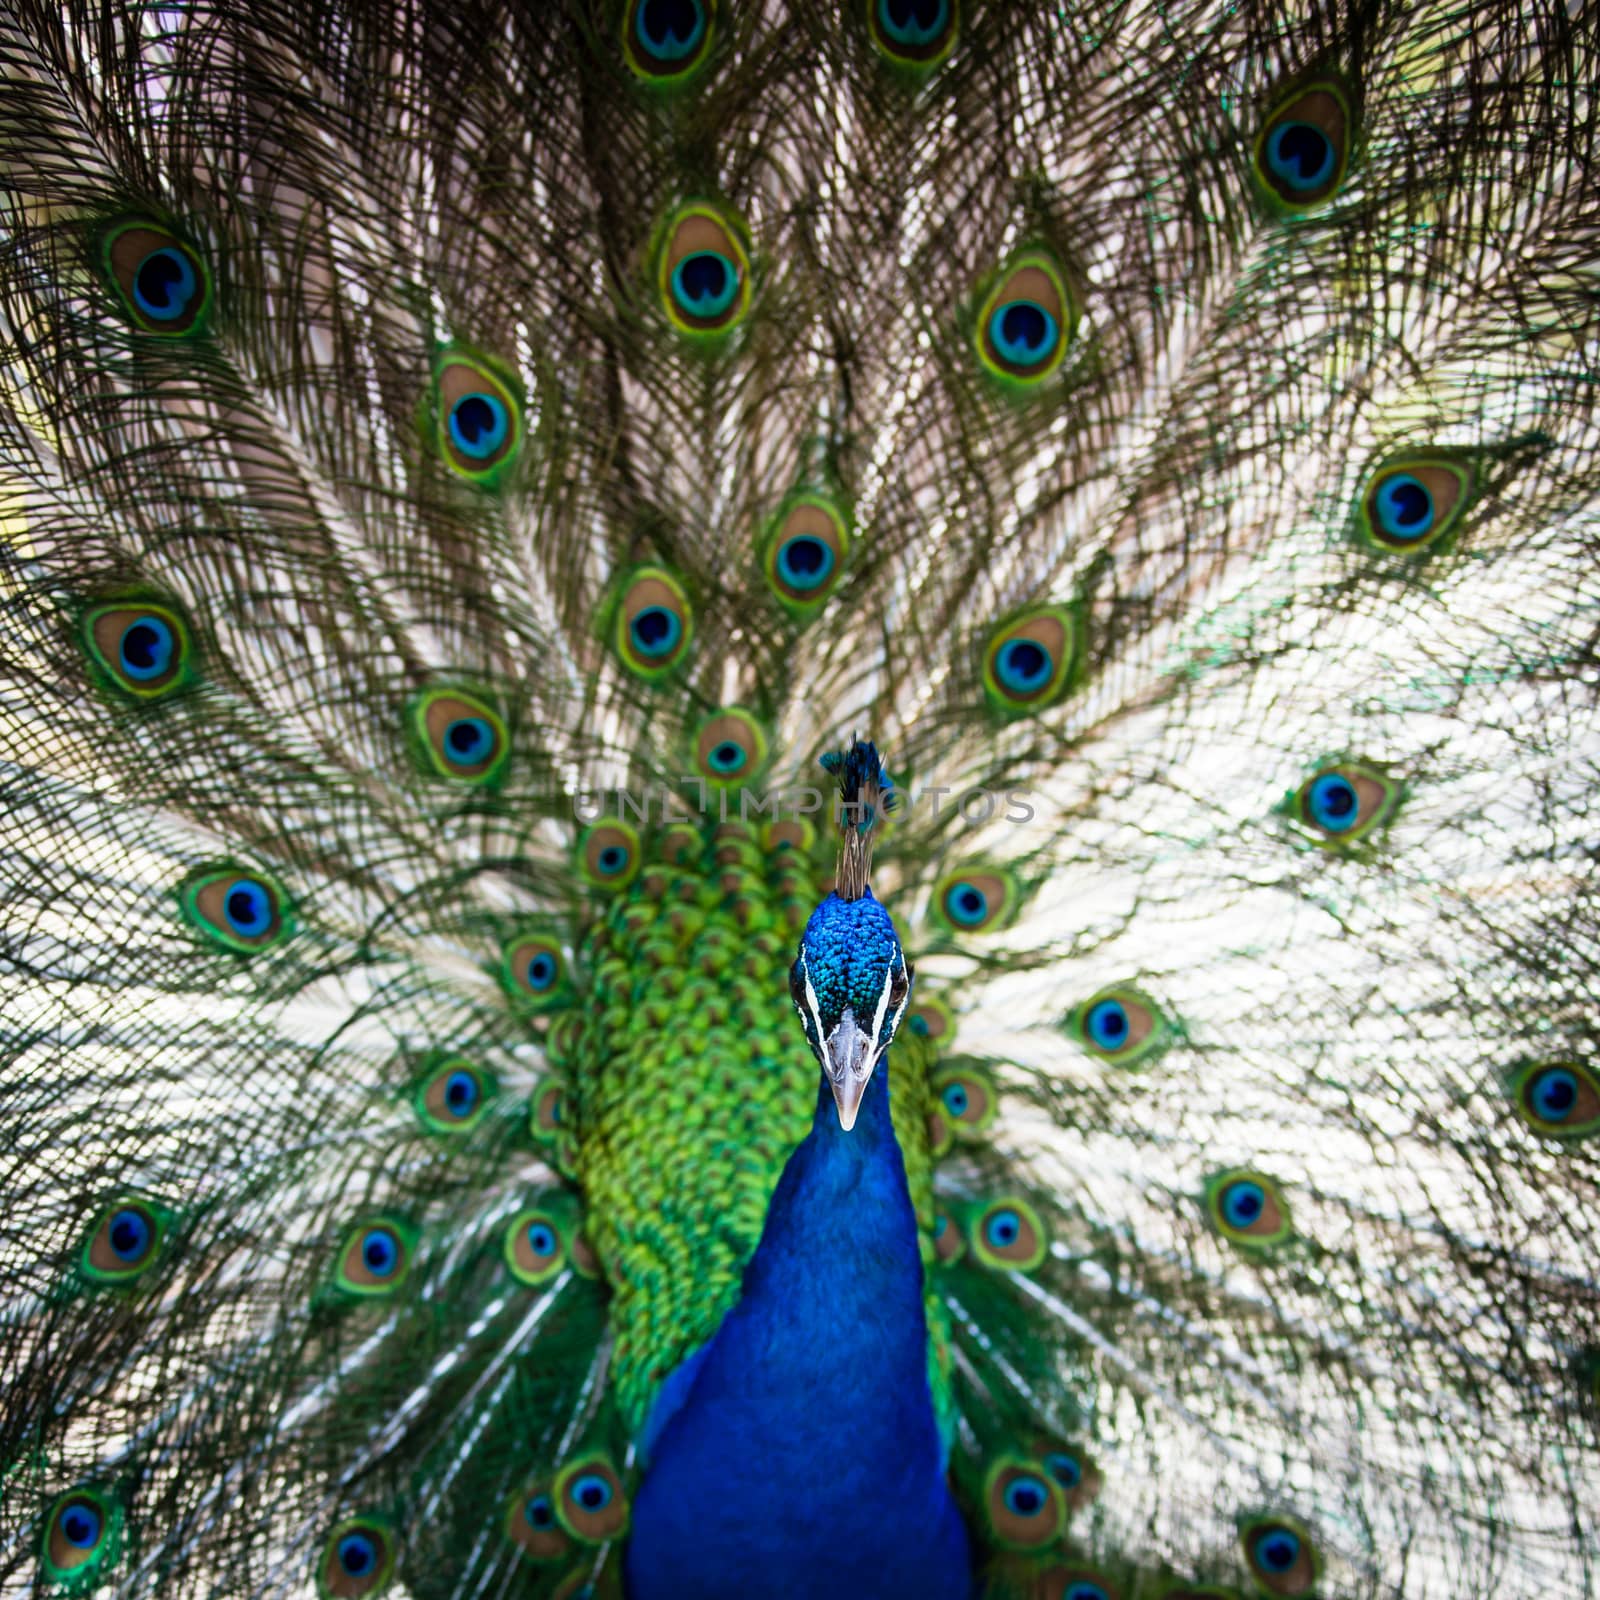 Splendid peacock with feathers out (Pavo cristatus) by viktor_cap